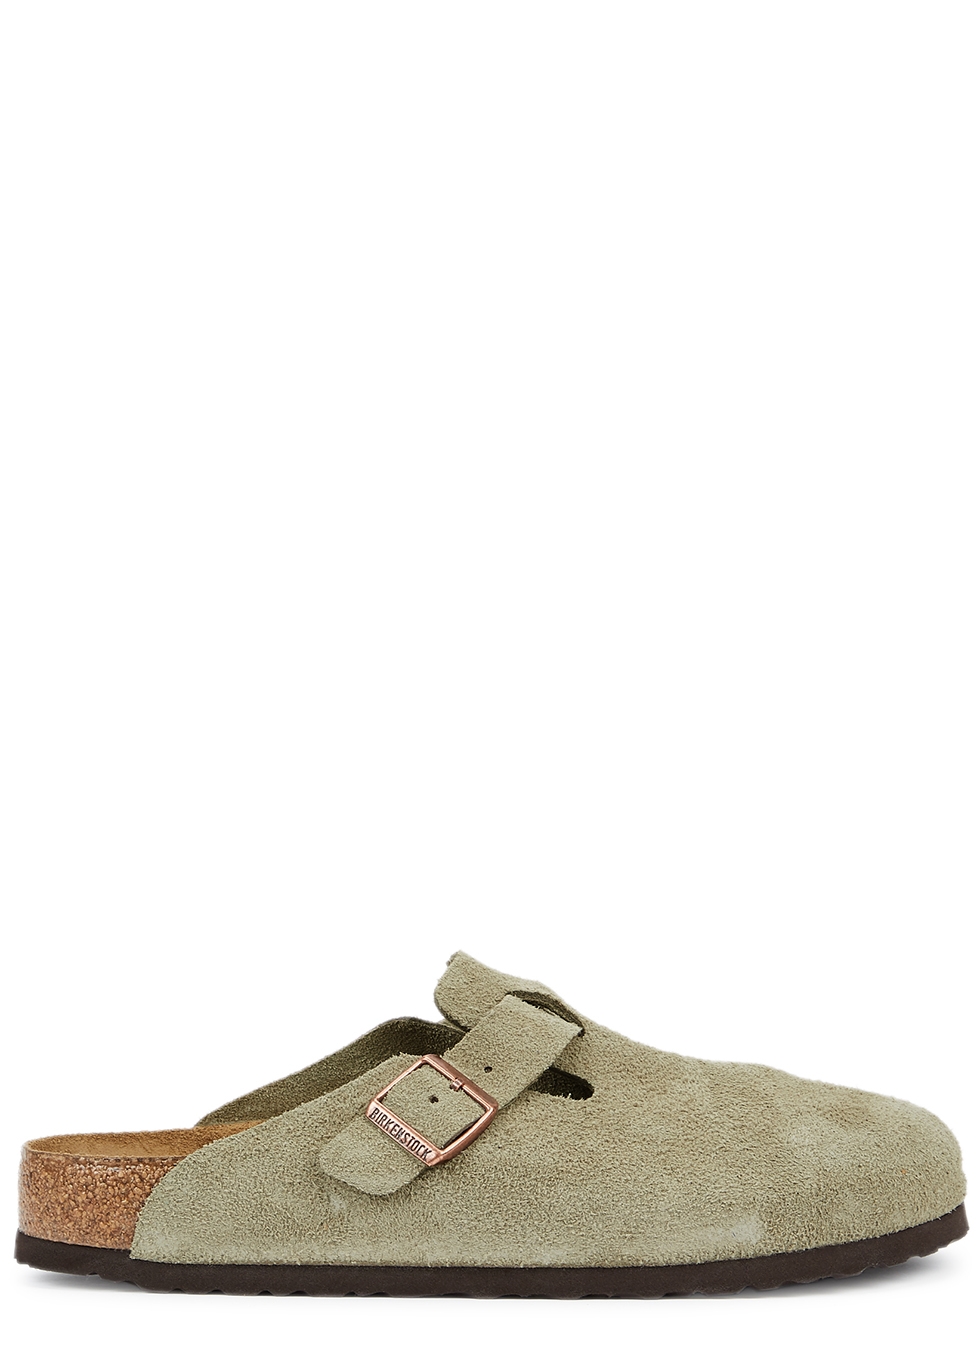 Boston taupe suede sliders